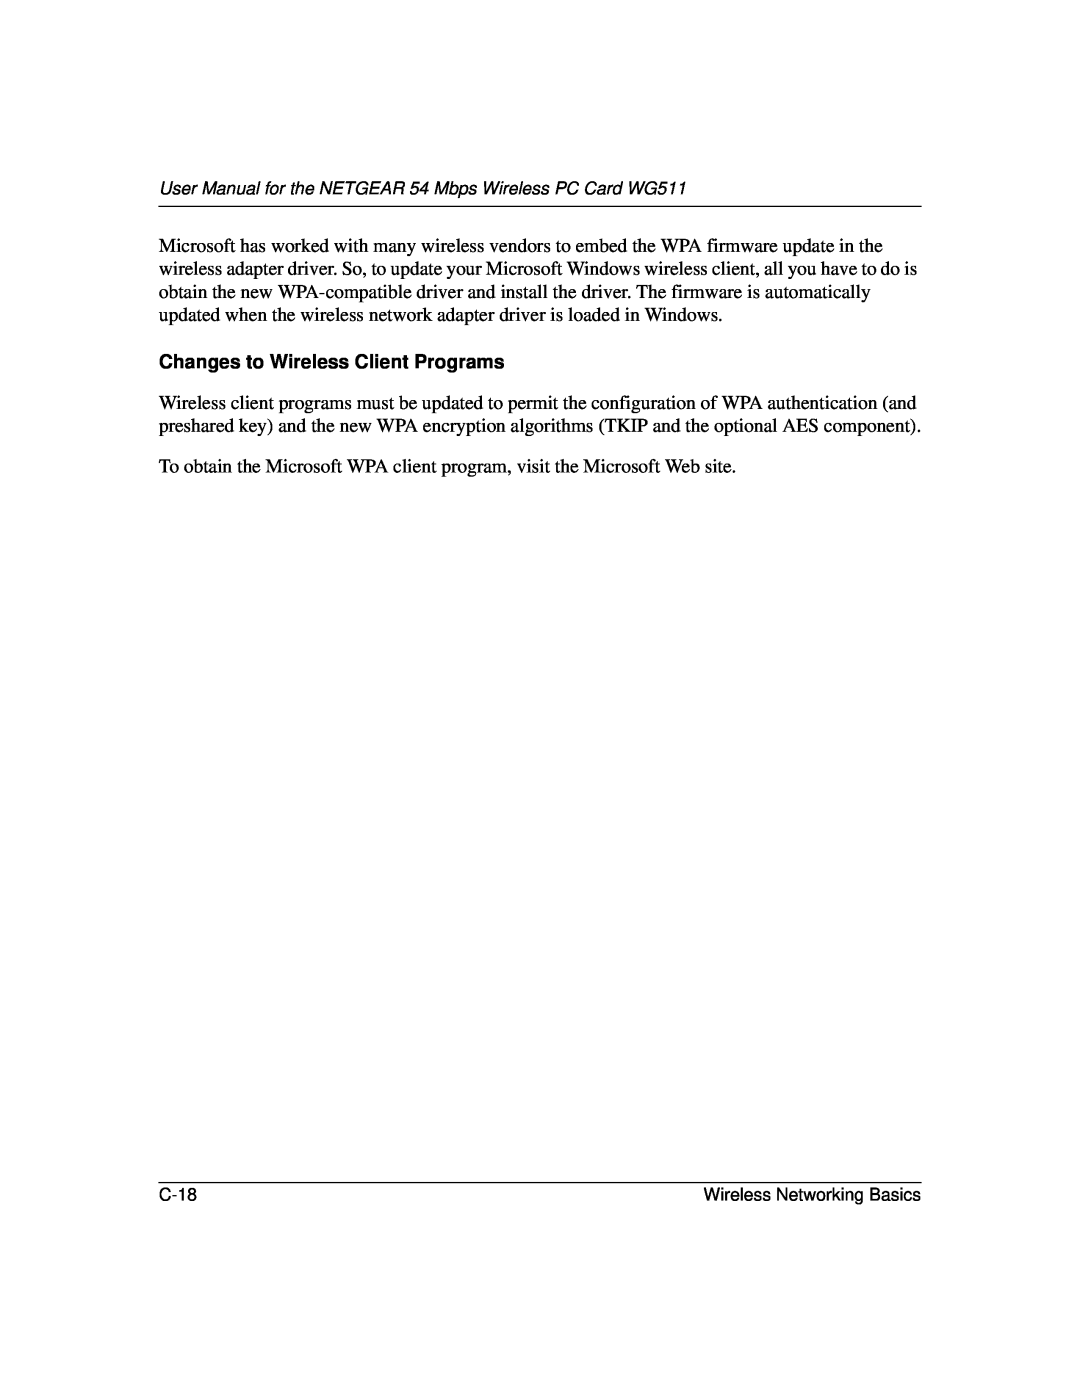 NETGEAR WGE111 user manual Changes to Wireless Client Programs 